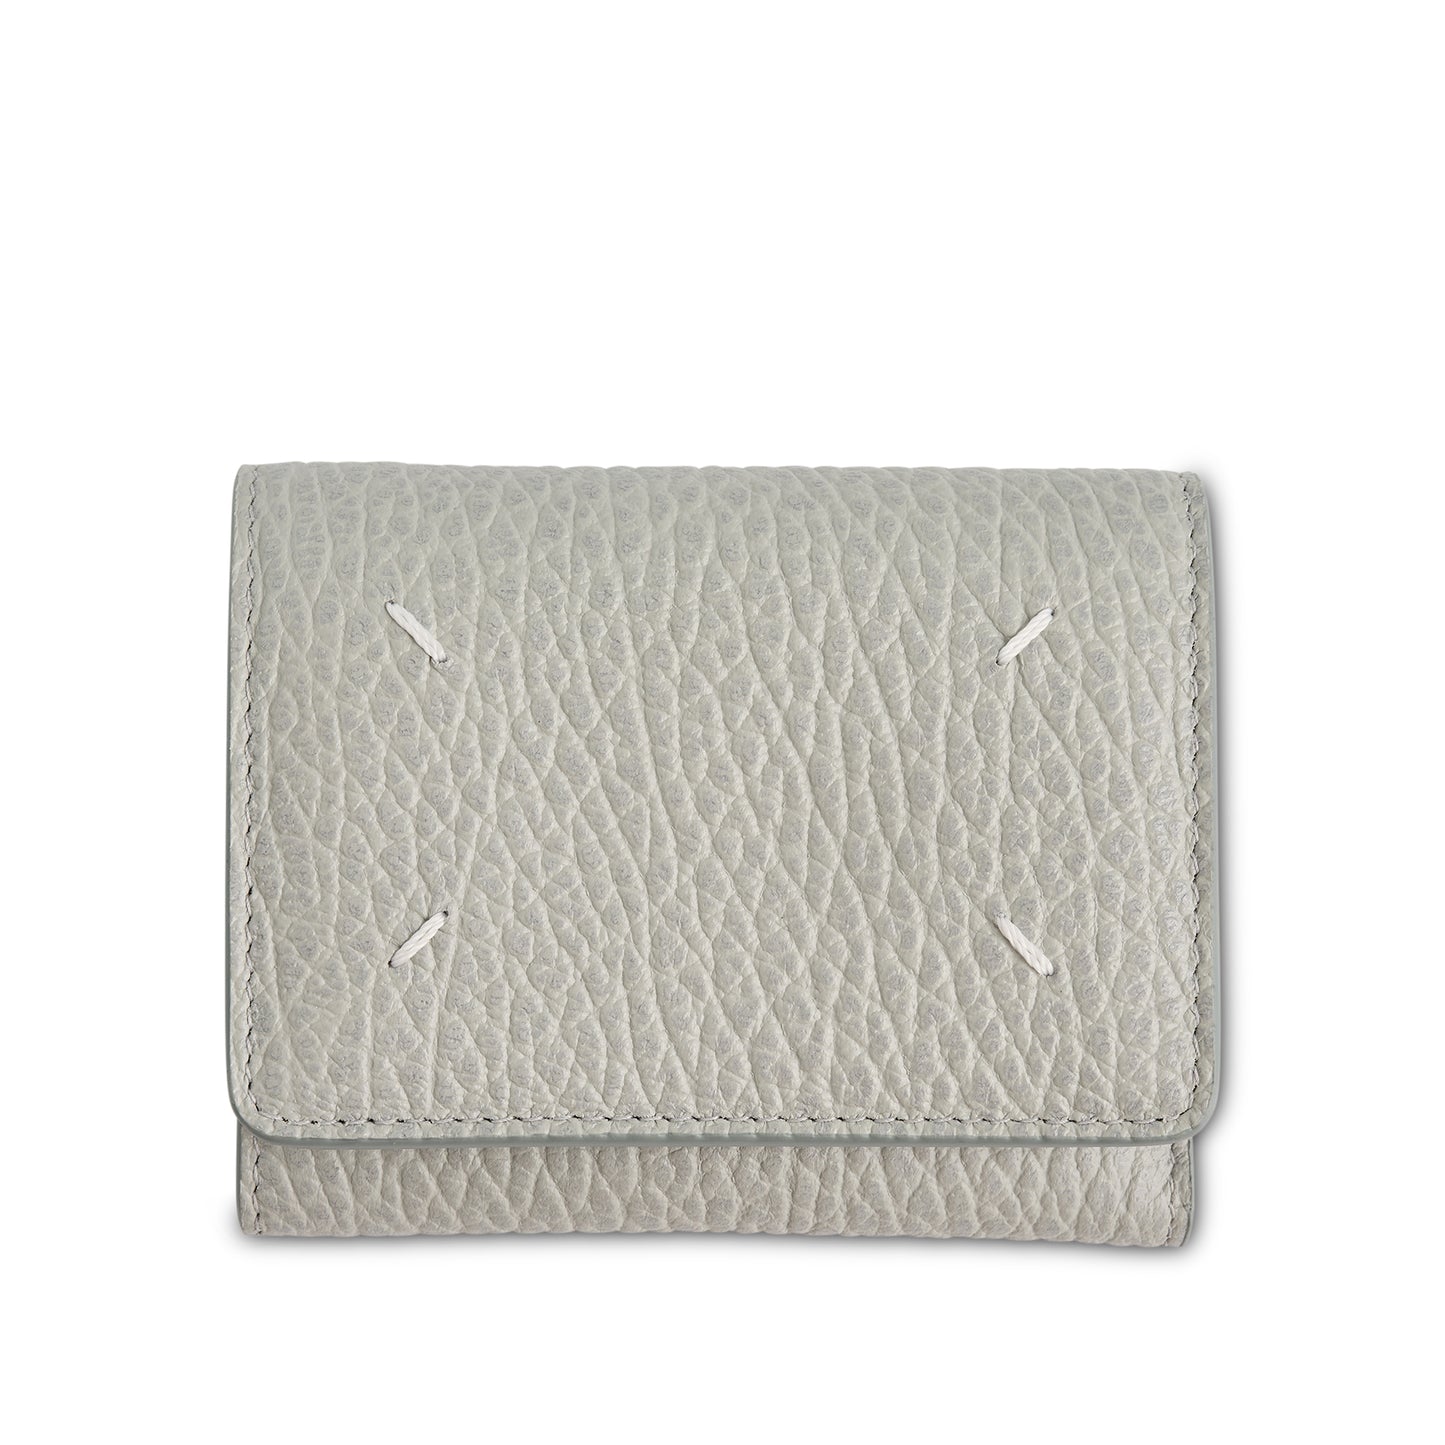 Four Stitches Tri Fold Wallet in Anisette